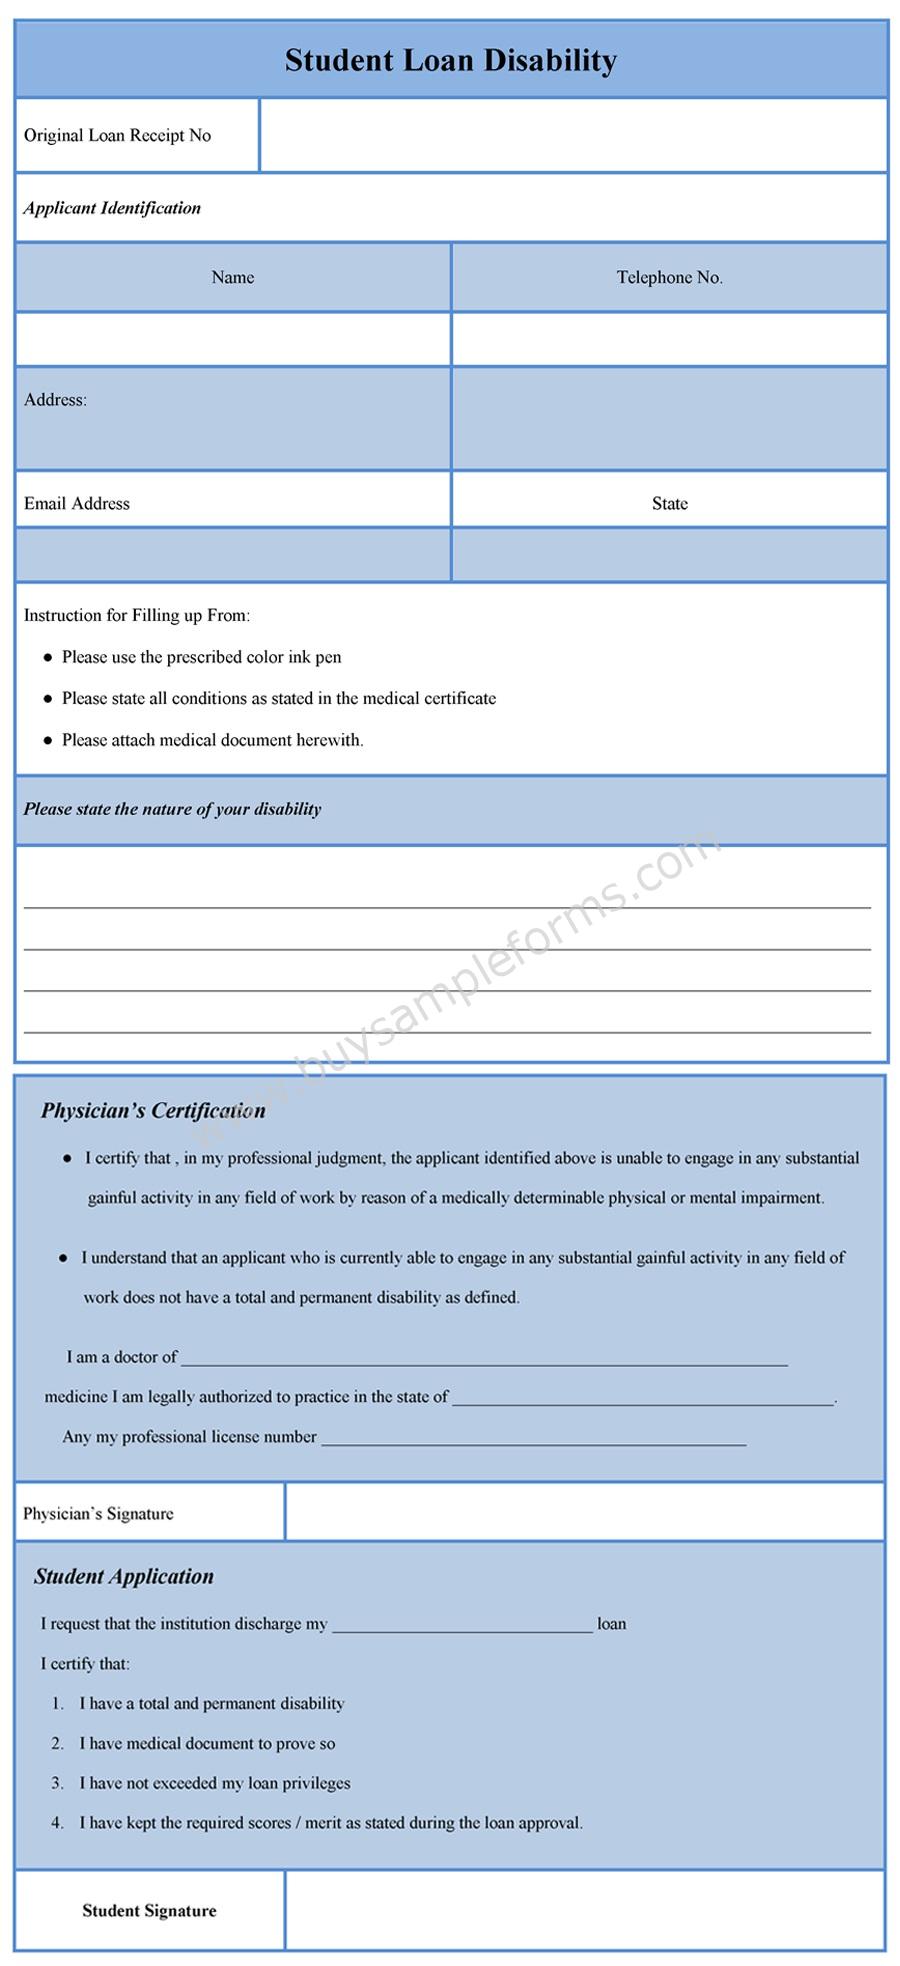 Student Loan Disability Form